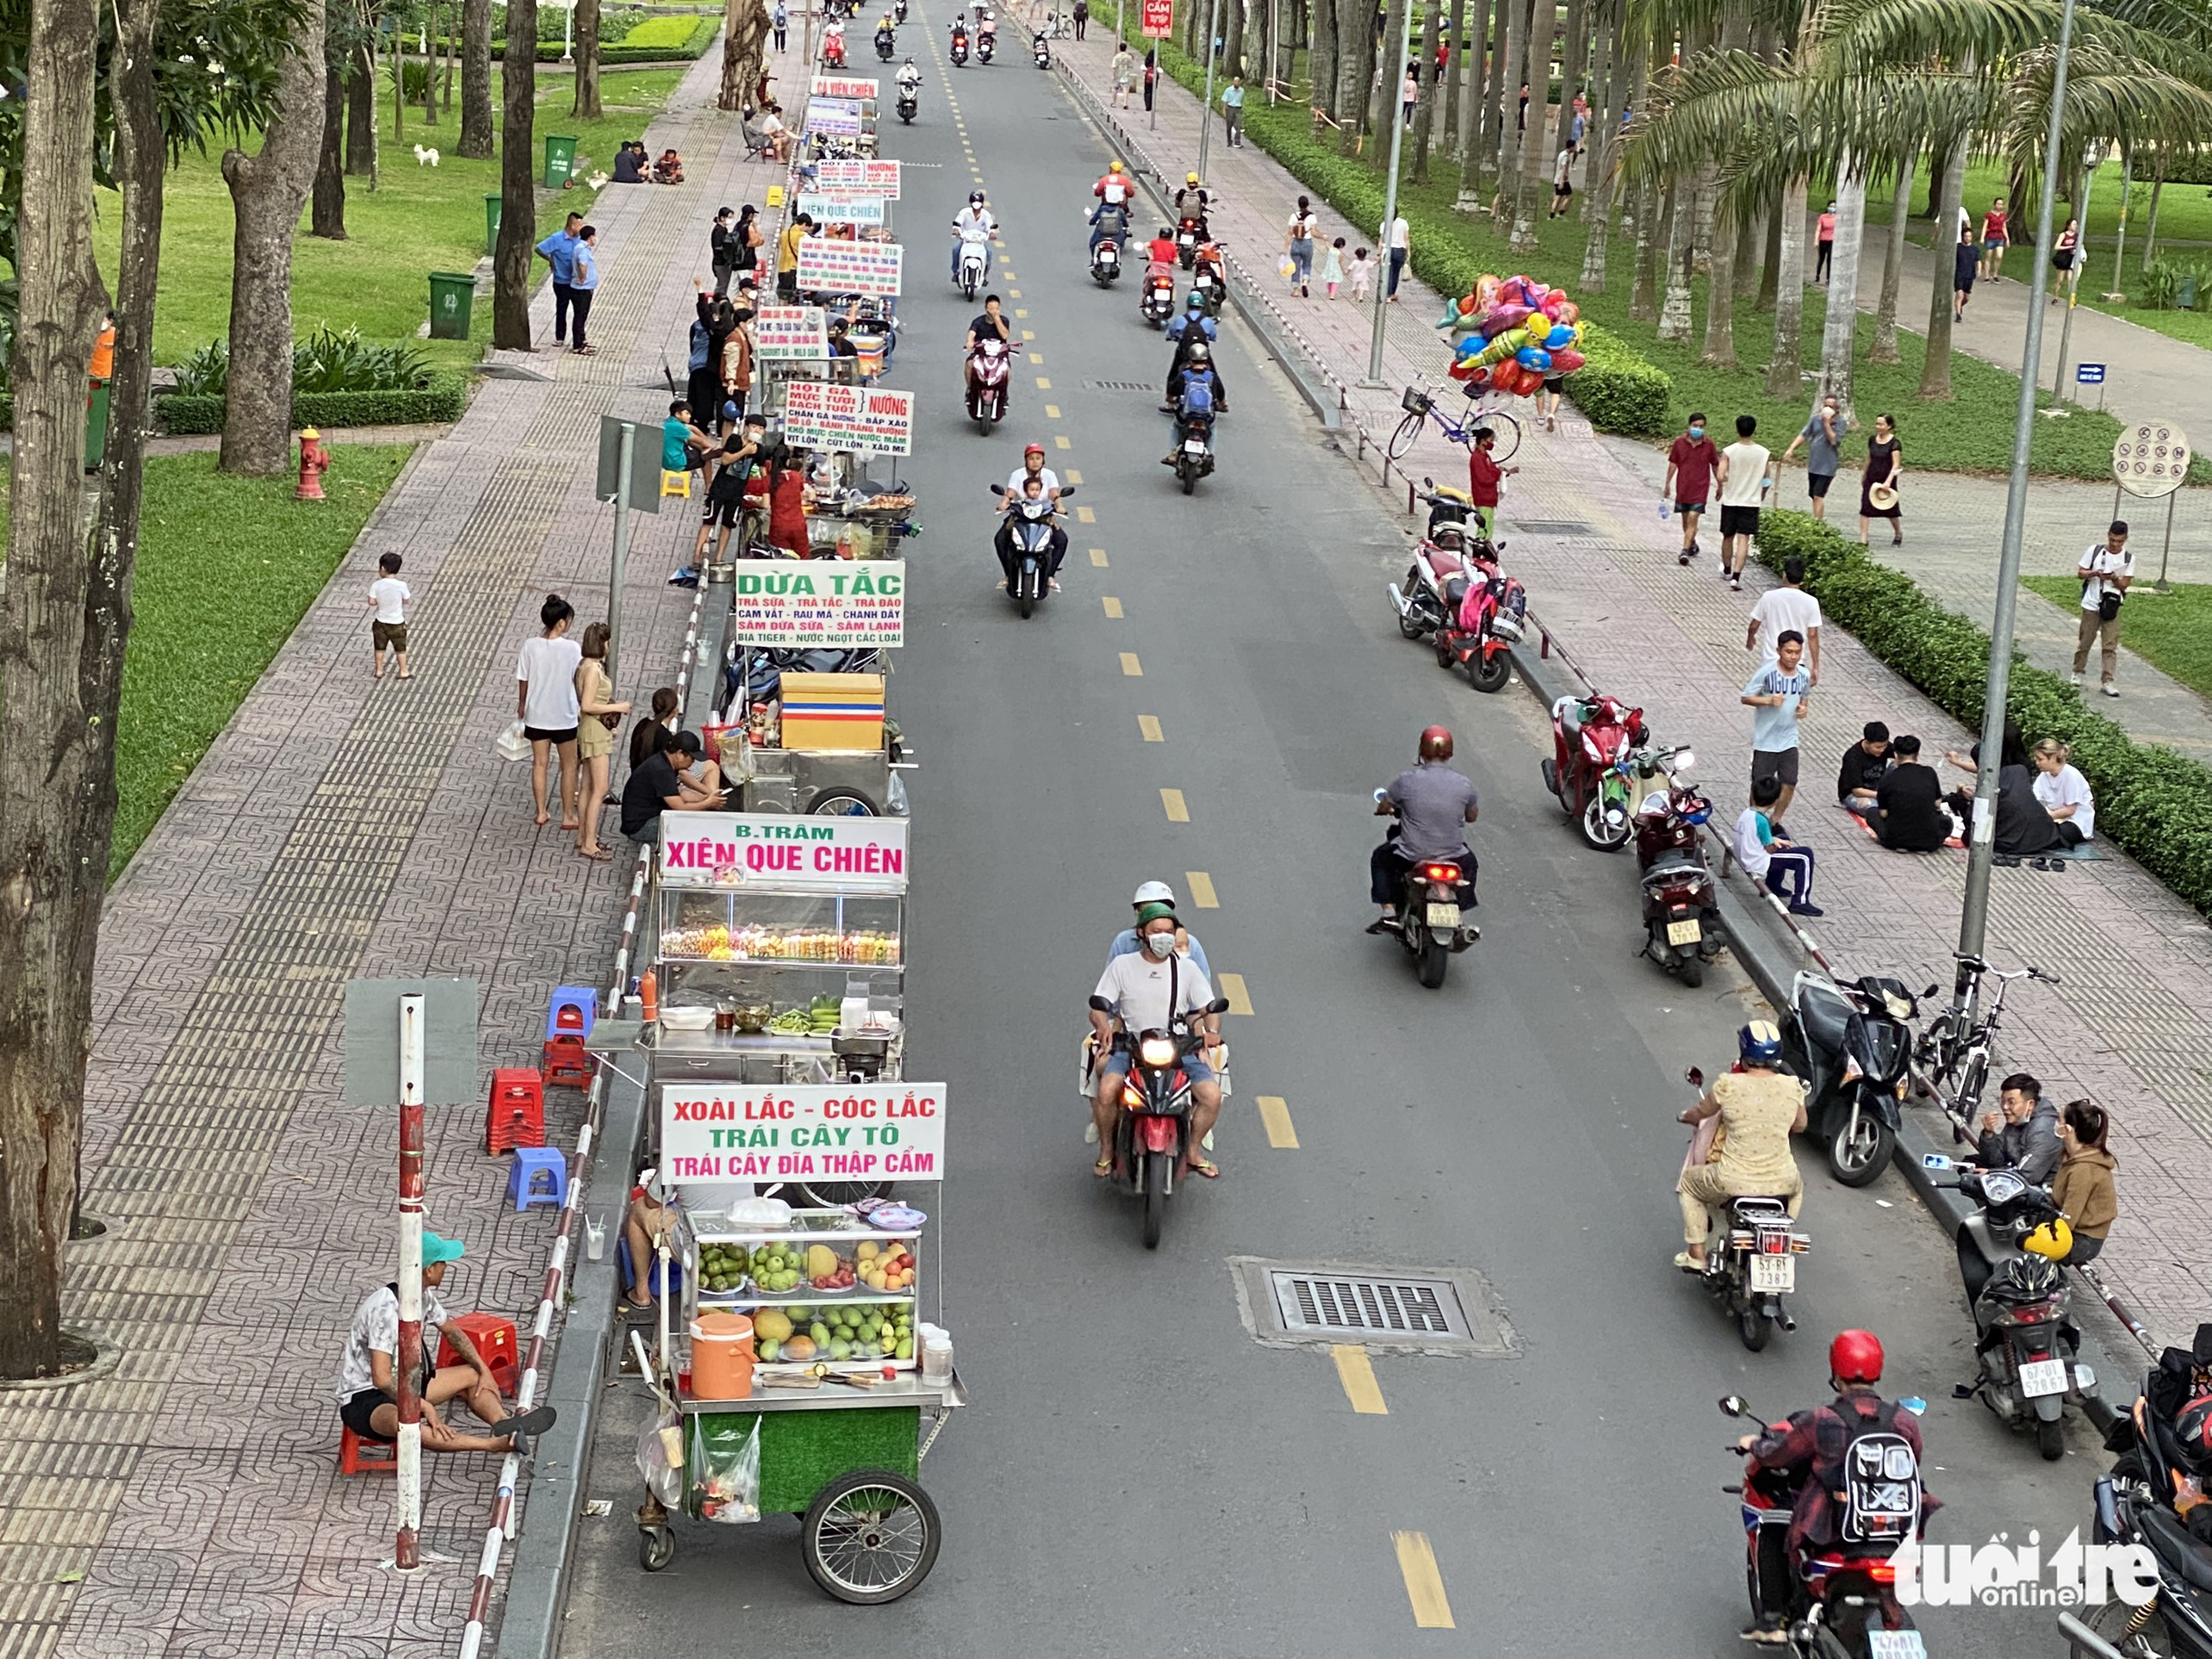 Street, sidewalk encroachment remains rife in Ho Chi Minh City